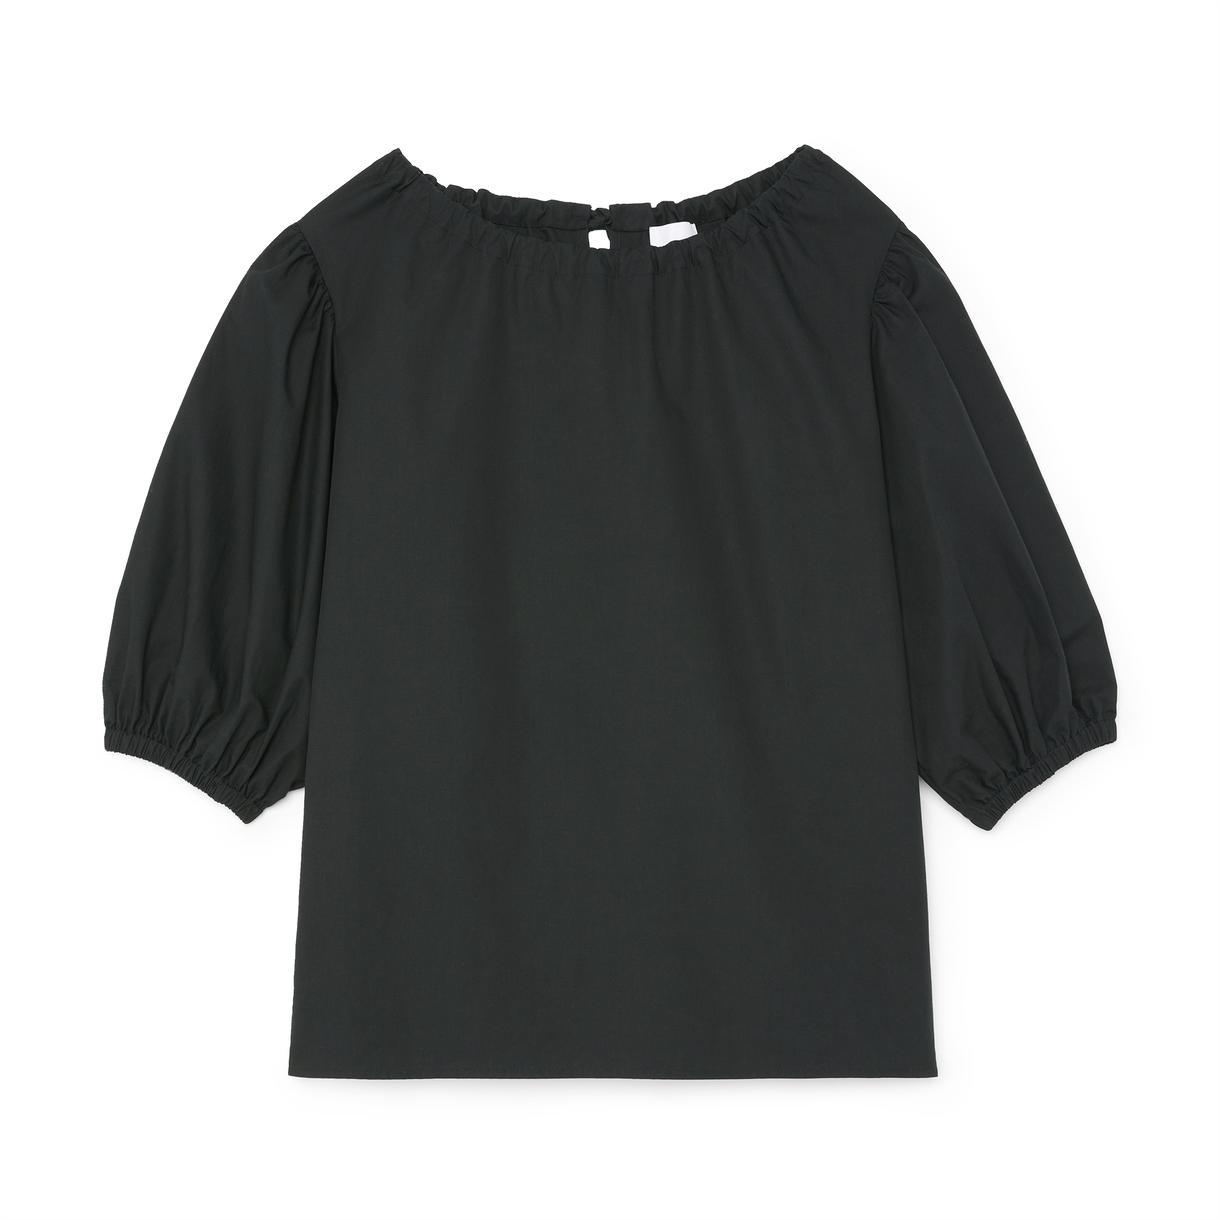 G. Label by goop Fallon Tie-Back Top